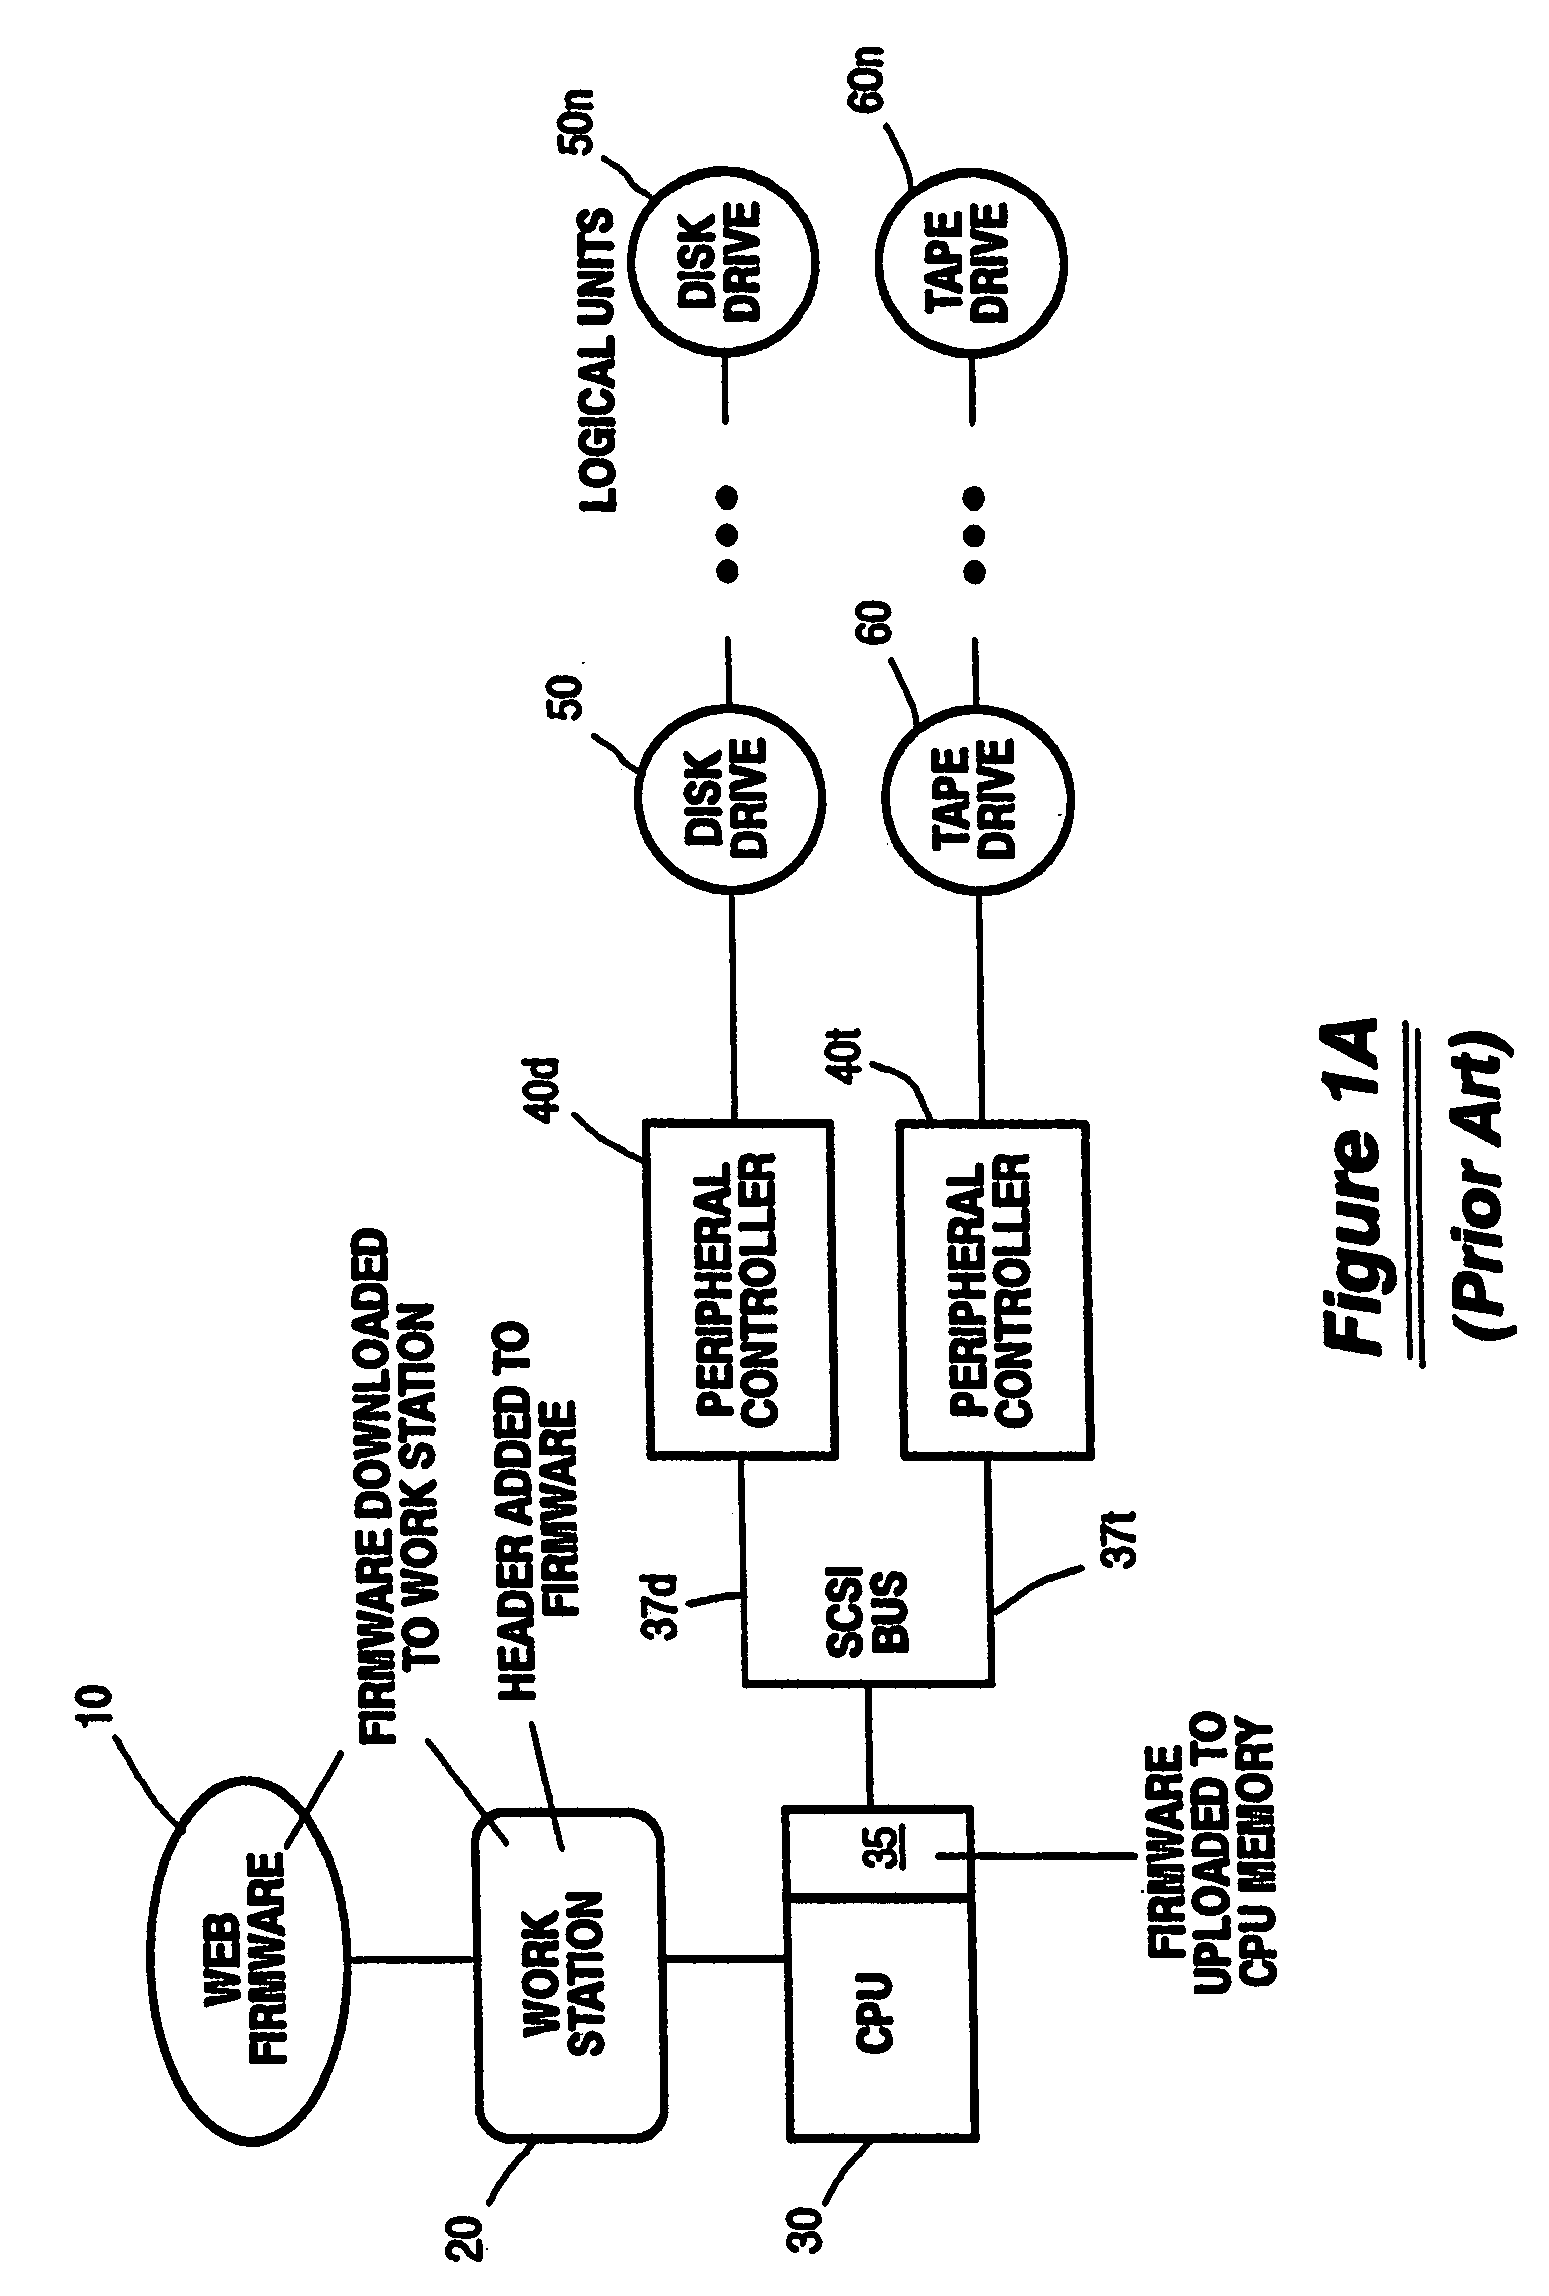 Method for efficiently downloading SCSI and SERVO firmware to SCSI target controllers